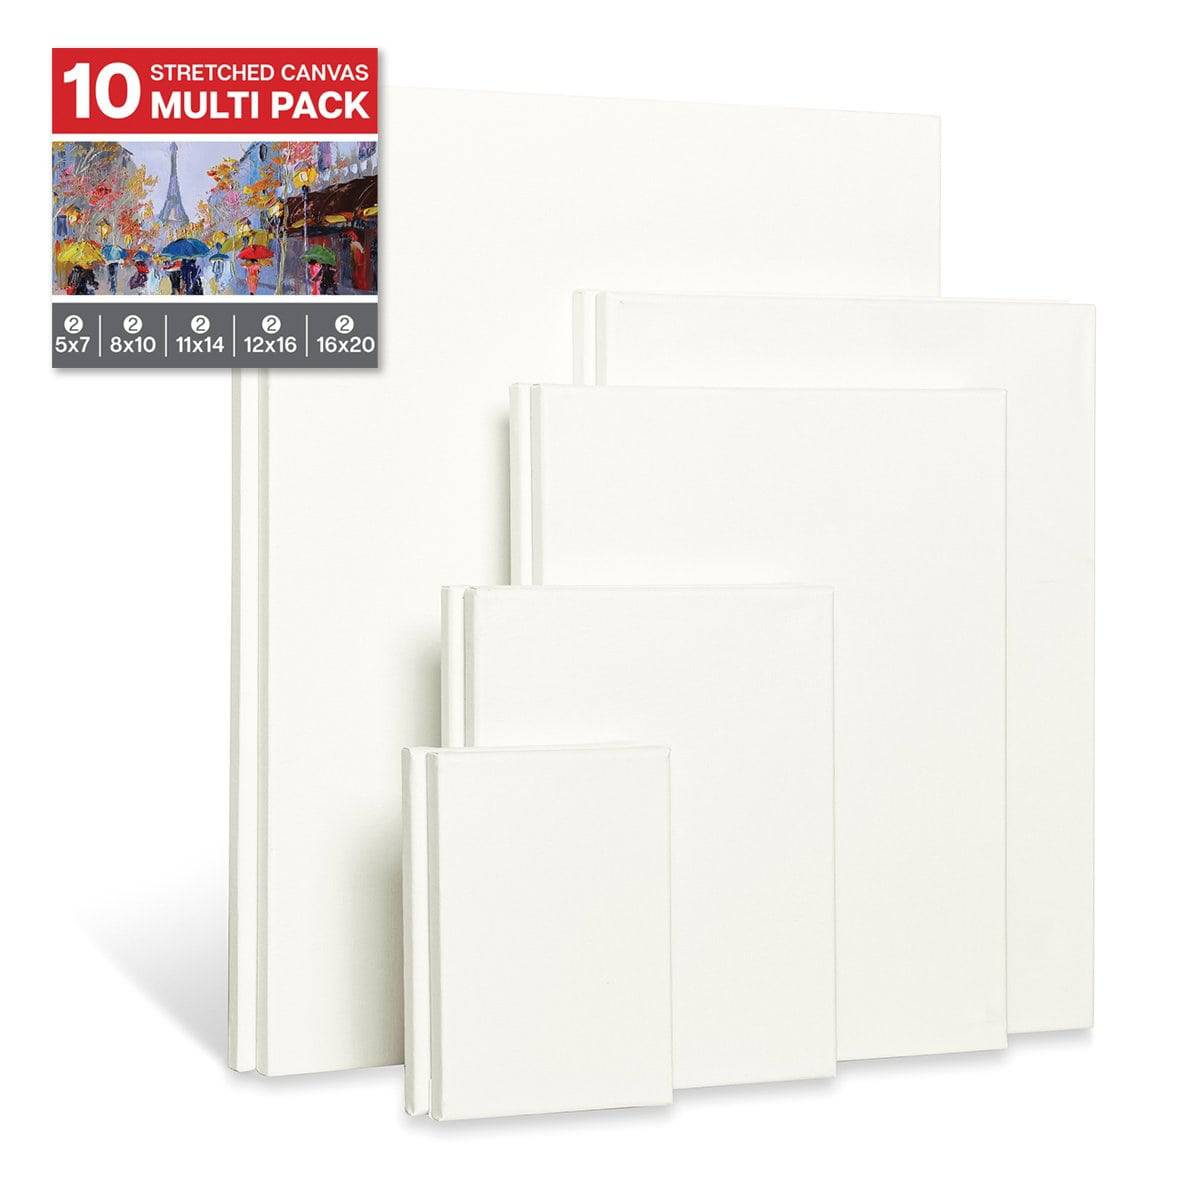 KINGART® Stretched White Canvas Multi-size pack, 10-Pack (2 ea. 5x7, 8x10,  11x14, 12x16, 16x20)